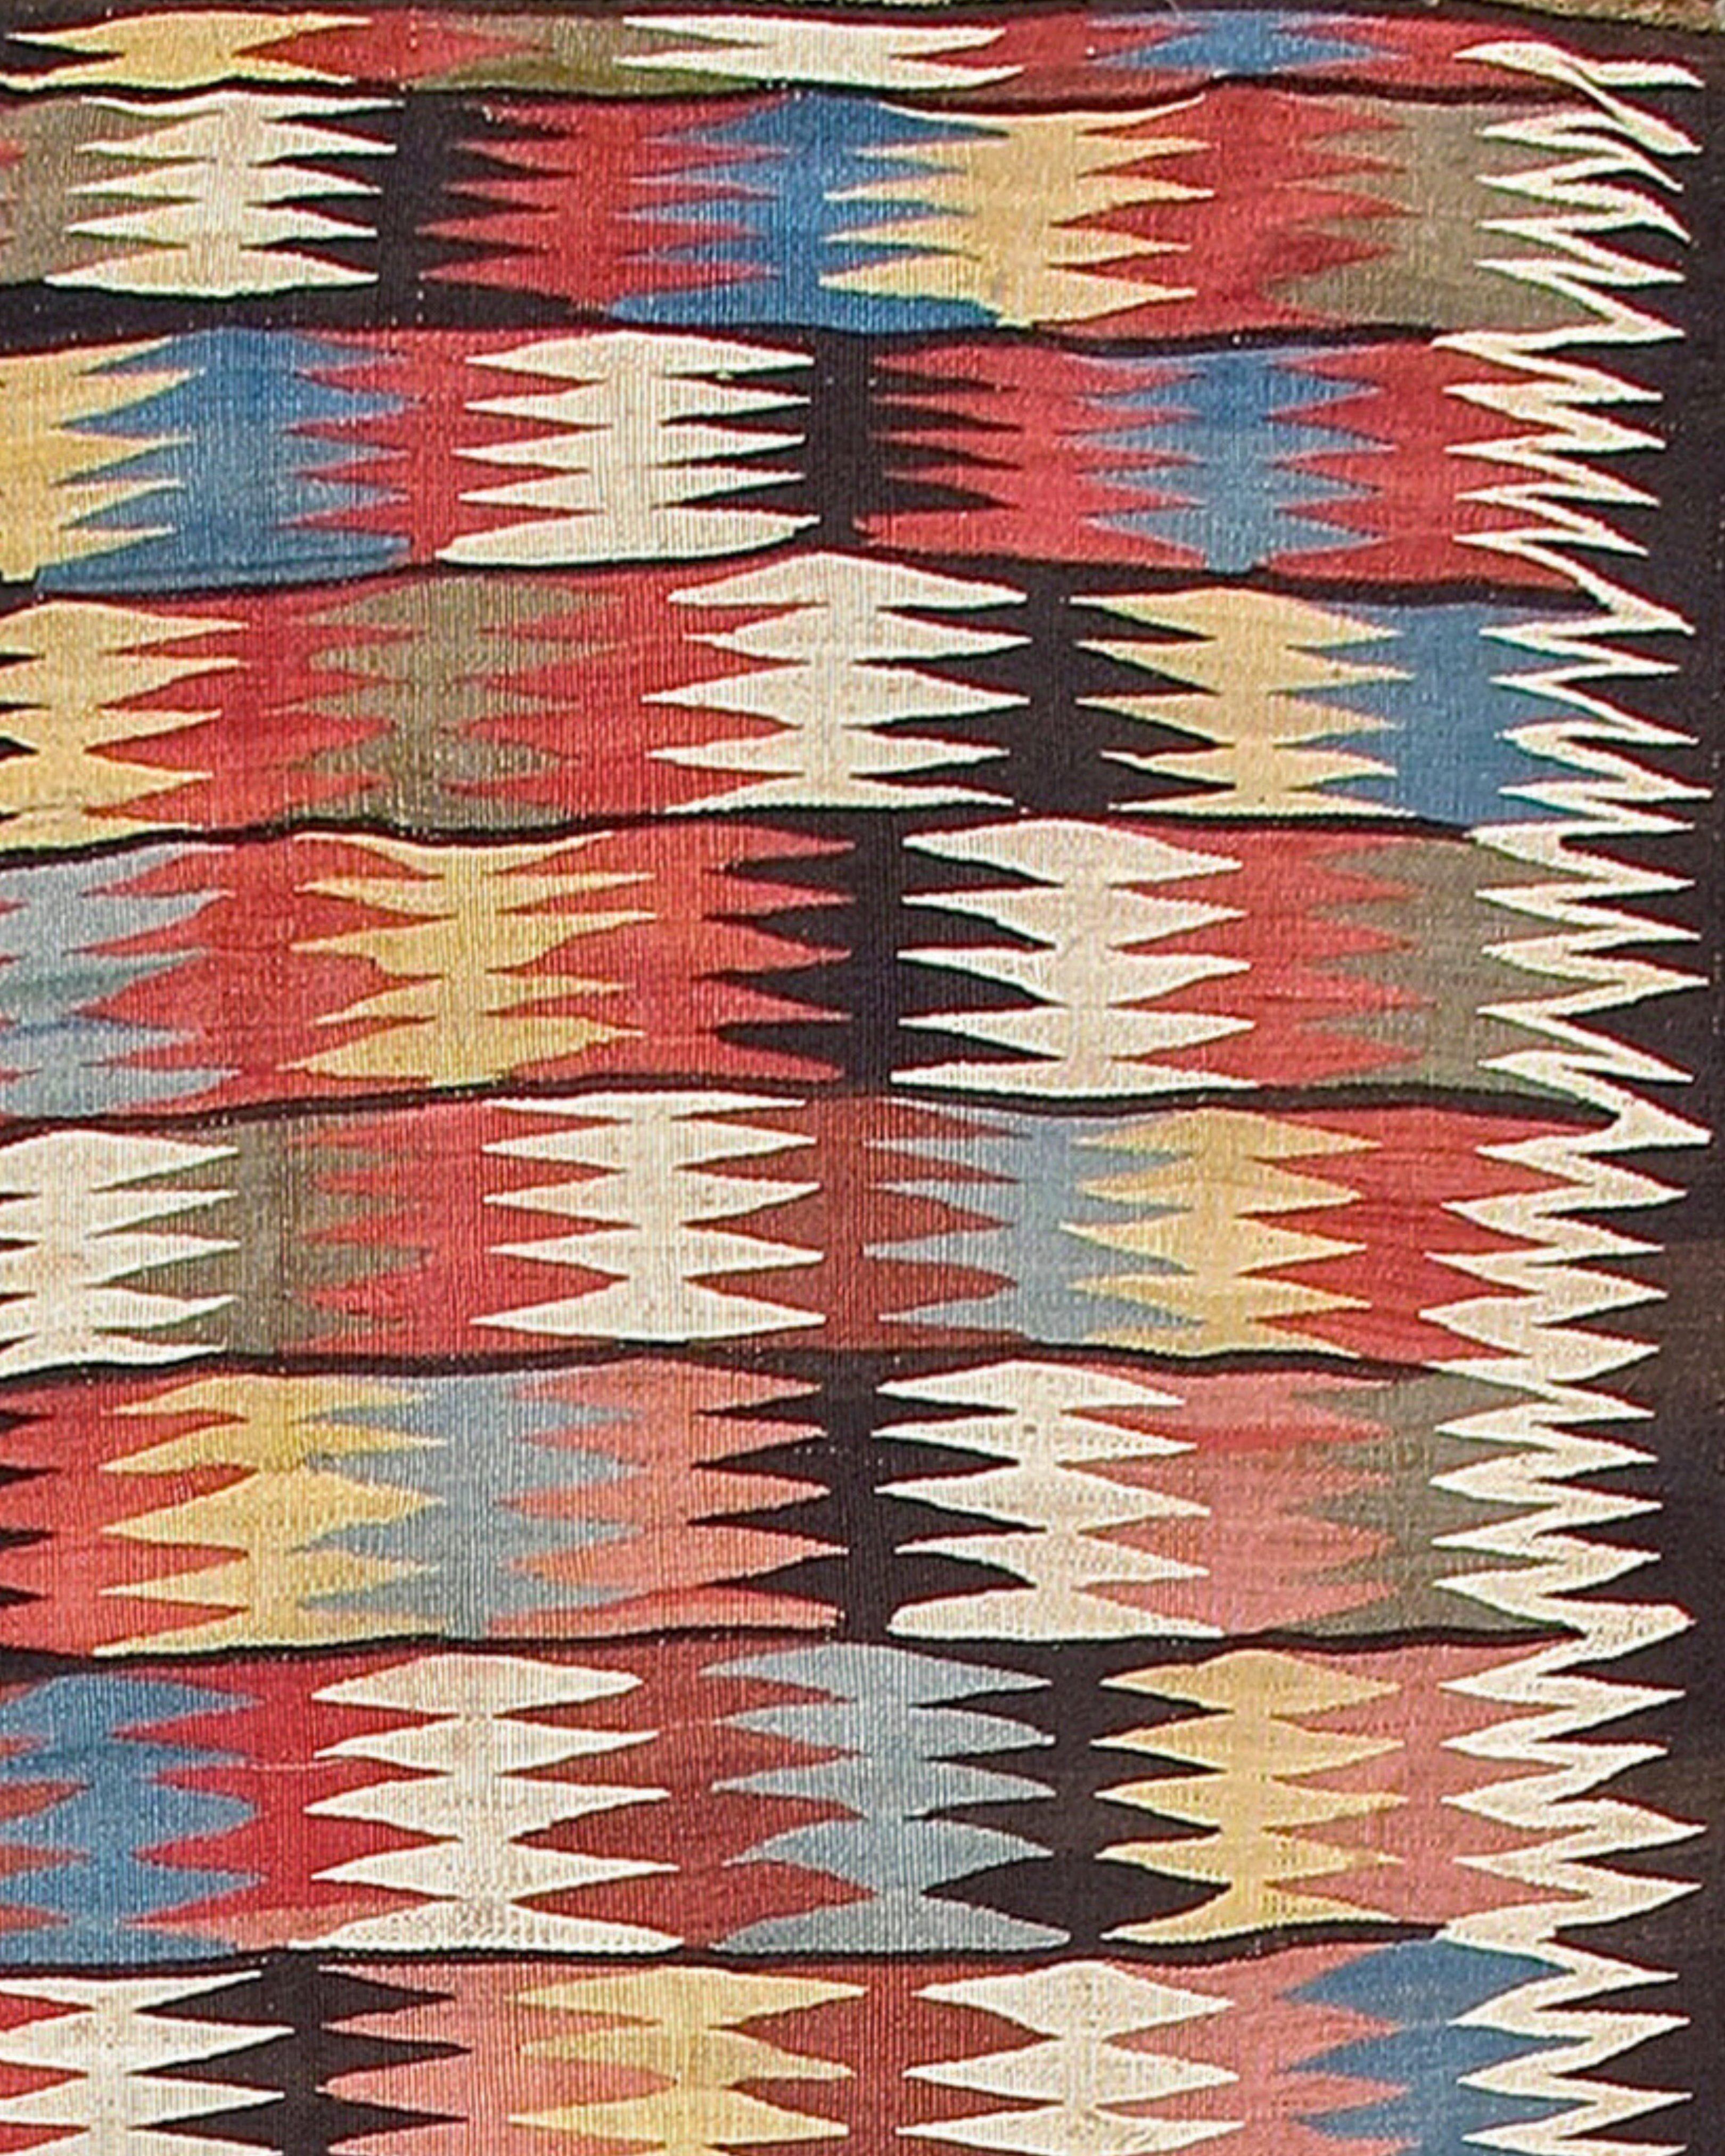 Antique Persian Veramin Kilim Rug, c. 1900

This kilim has a macrame end finish at one end and camel warps alternating with brown and white ply warps on the other. Very good color.

Additional Information:
Dimensions: 10'0